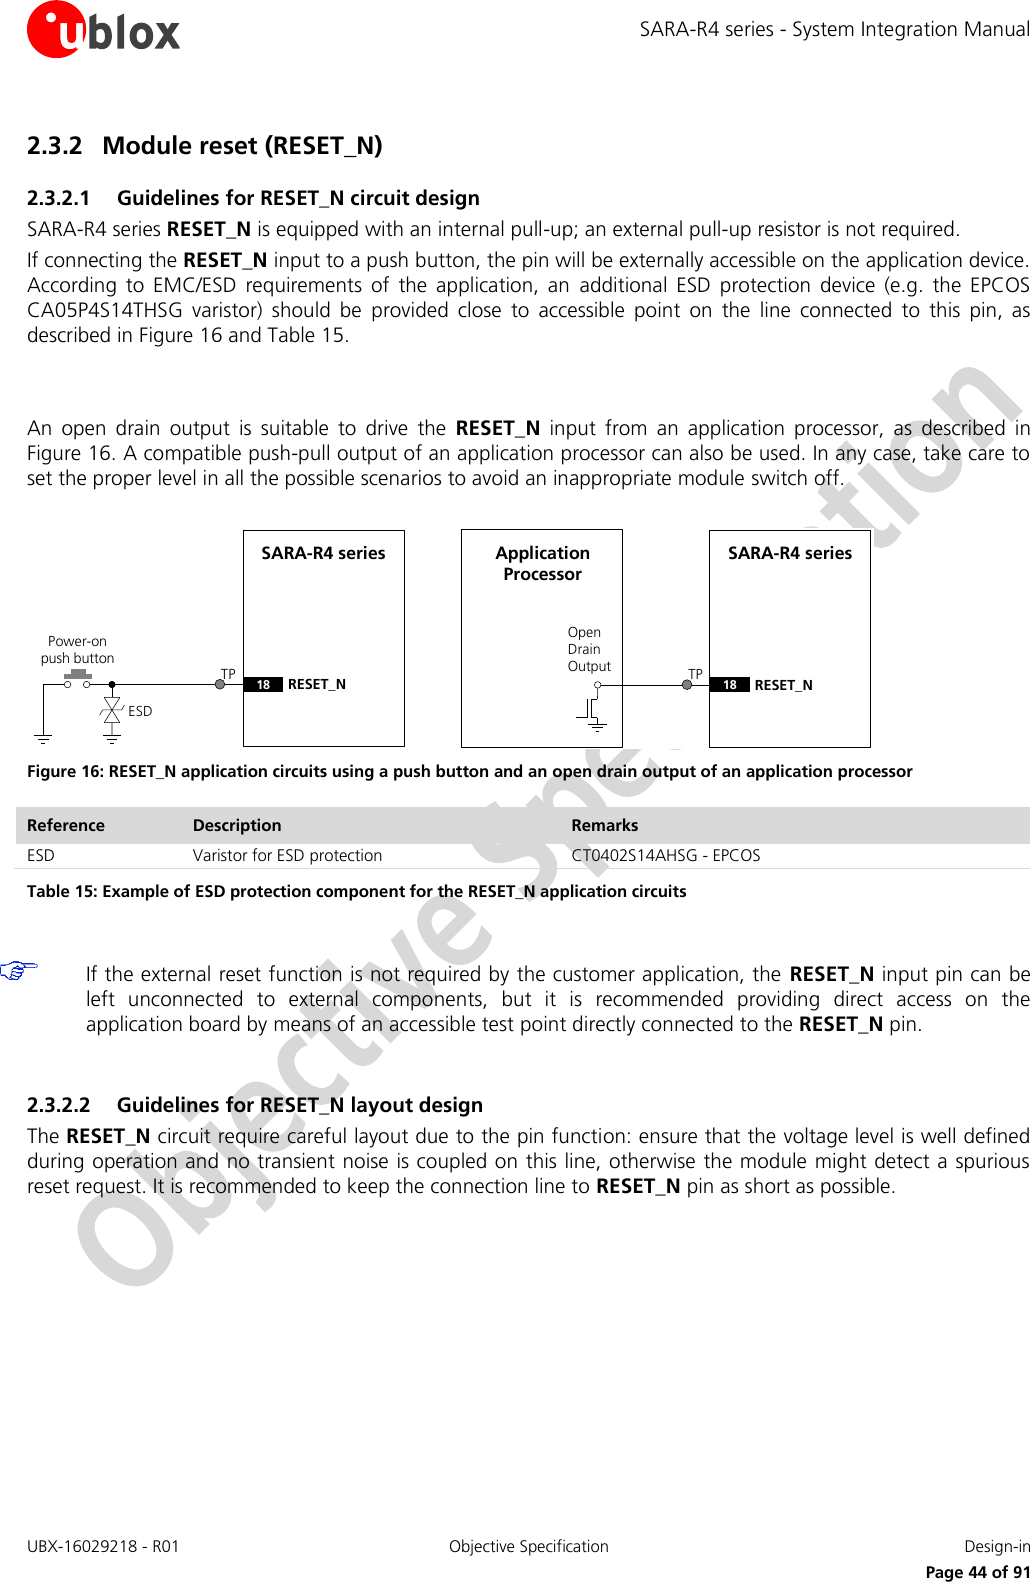 SARA-R4 series - System Integration Manual UBX-16029218 - R01  Objective Specification  Design-in     Page 44 of 91 2.3.2 Module reset (RESET_N) 2.3.2.1 Guidelines for RESET_N circuit design SARA-R4 series RESET_N is equipped with an internal pull-up; an external pull-up resistor is not required. If connecting the RESET_N input to a push button, the pin will be externally accessible on the application device. According  to  EMC/ESD  requirements  of  the  application,  an  additional  ESD  protection  device  (e.g.  the  EPCOS CA05P4S14THSG  varistor)  should  be  provided  close  to  accessible  point  on  the  line  connected  to  this  pin,  as described in Figure 16 and Table 15.   An  open  drain  output  is  suitable  to  drive  the  RESET_N  input  from  an  application  processor,  as  described  in Figure 16. A compatible push-pull output of an application processor can also be used. In any case, take care to set the proper level in all the possible scenarios to avoid an inappropriate module switch off.  SARA-R4 series18 RESET_NPower-on push buttonESDOpen Drain OutputApplication ProcessorSARA-R4 series18 RESET_NTP TP Figure 16: RESET_N application circuits using a push button and an open drain output of an application processor Reference Description Remarks ESD Varistor for ESD protection CT0402S14AHSG - EPCOS Table 15: Example of ESD protection component for the RESET_N application circuits   If the external reset function is not required by the customer application, the  RESET_N input pin can be left  unconnected  to  external  components,  but  it  is  recommended  providing  direct  access  on  the application board by means of an accessible test point directly connected to the RESET_N pin.  2.3.2.2 Guidelines for RESET_N layout design The RESET_N circuit require careful layout due to the pin function: ensure that the voltage level is well defined during operation and no transient noise is coupled on this line, otherwise the module might detect a spurious reset request. It is recommended to keep the connection line to RESET_N pin as short as possible.    